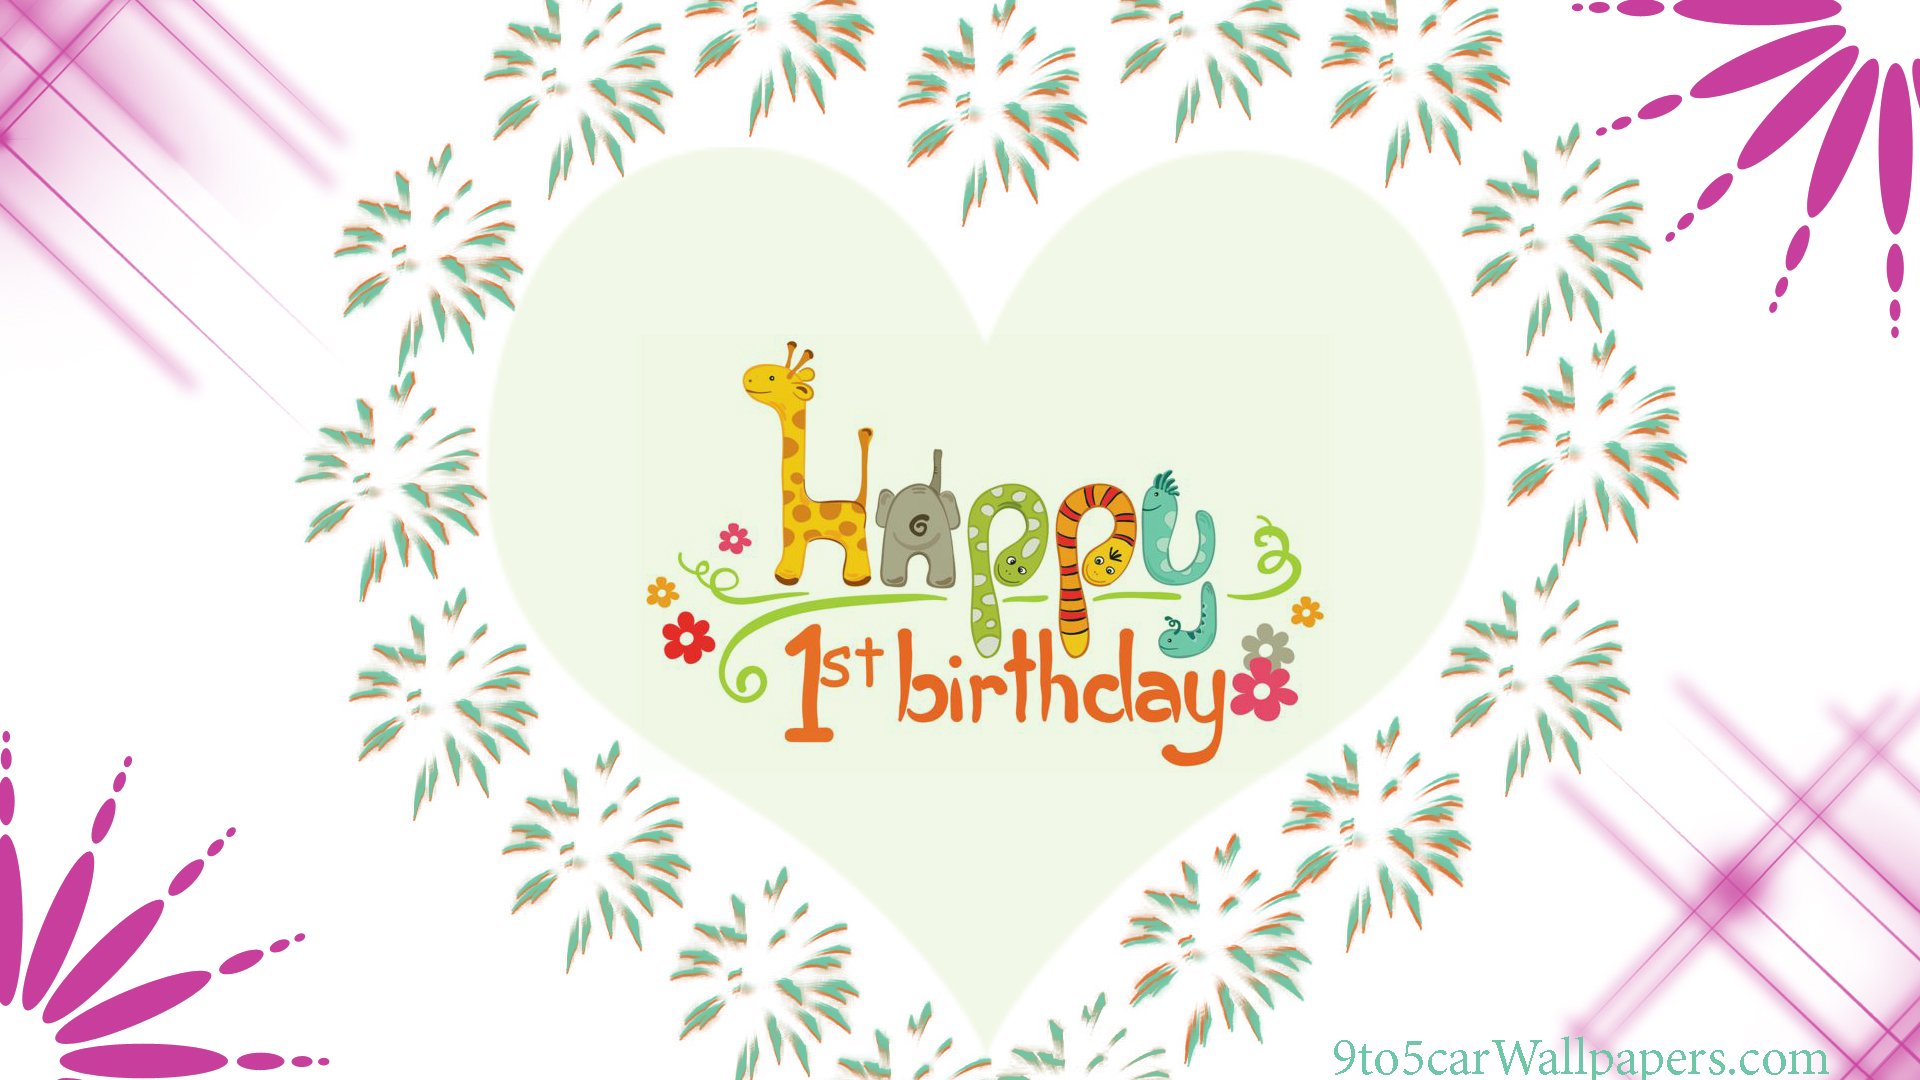 Birthday-Images-Free-Download